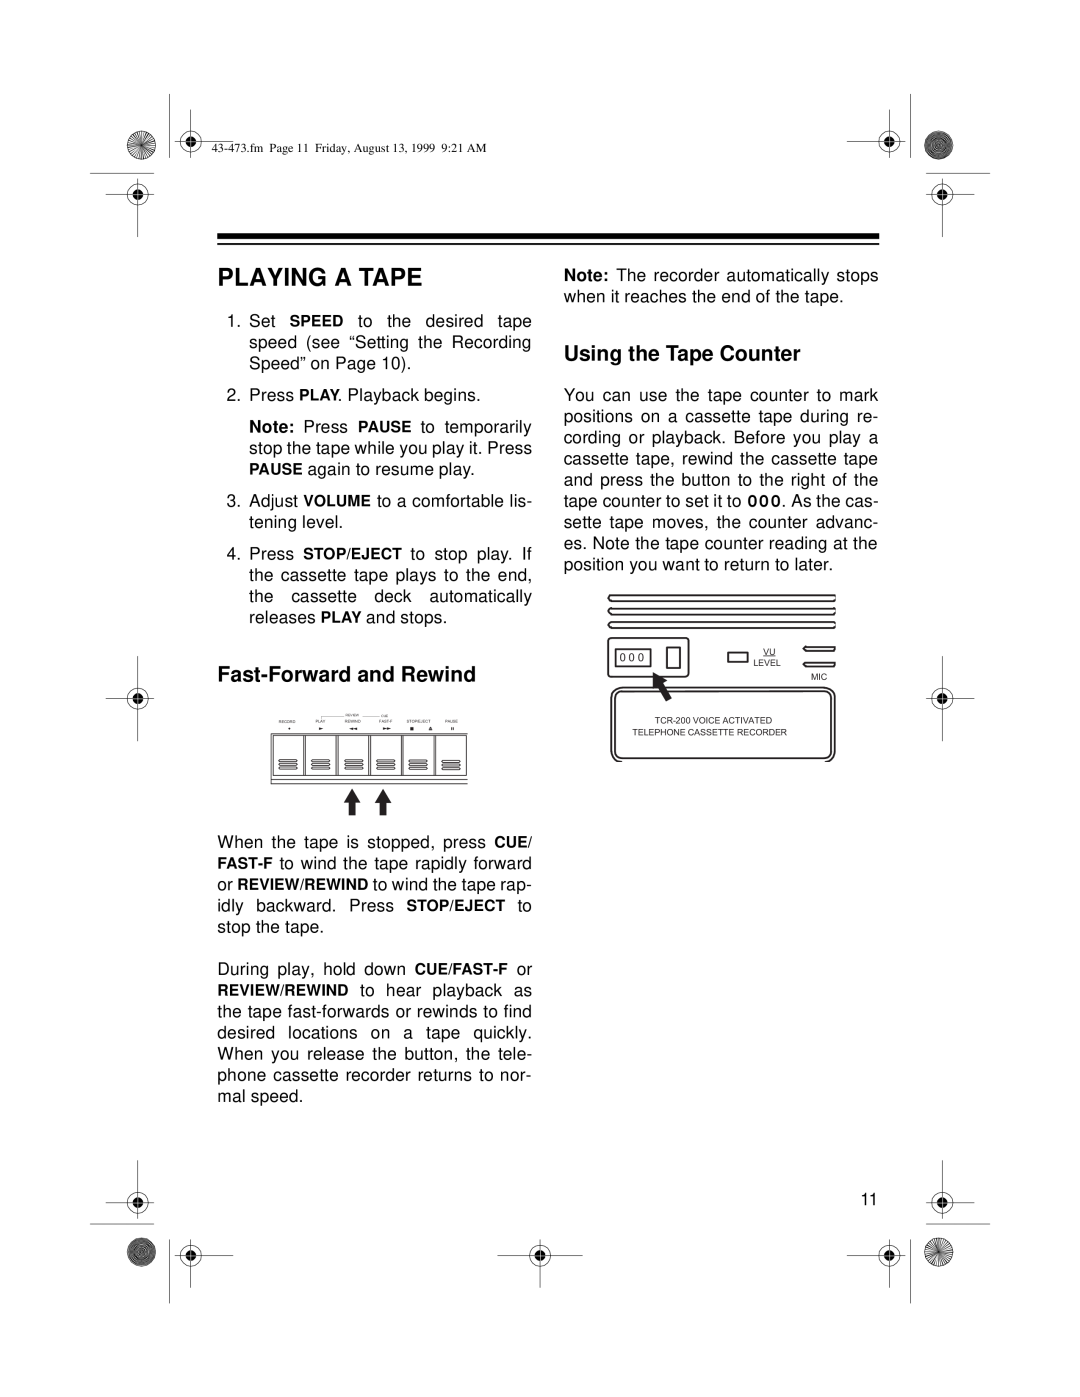 Roberts Radio TCR-200 owner manual Playing A Tape, Fast-Forwardand Rewind, Using the Tape Counter 